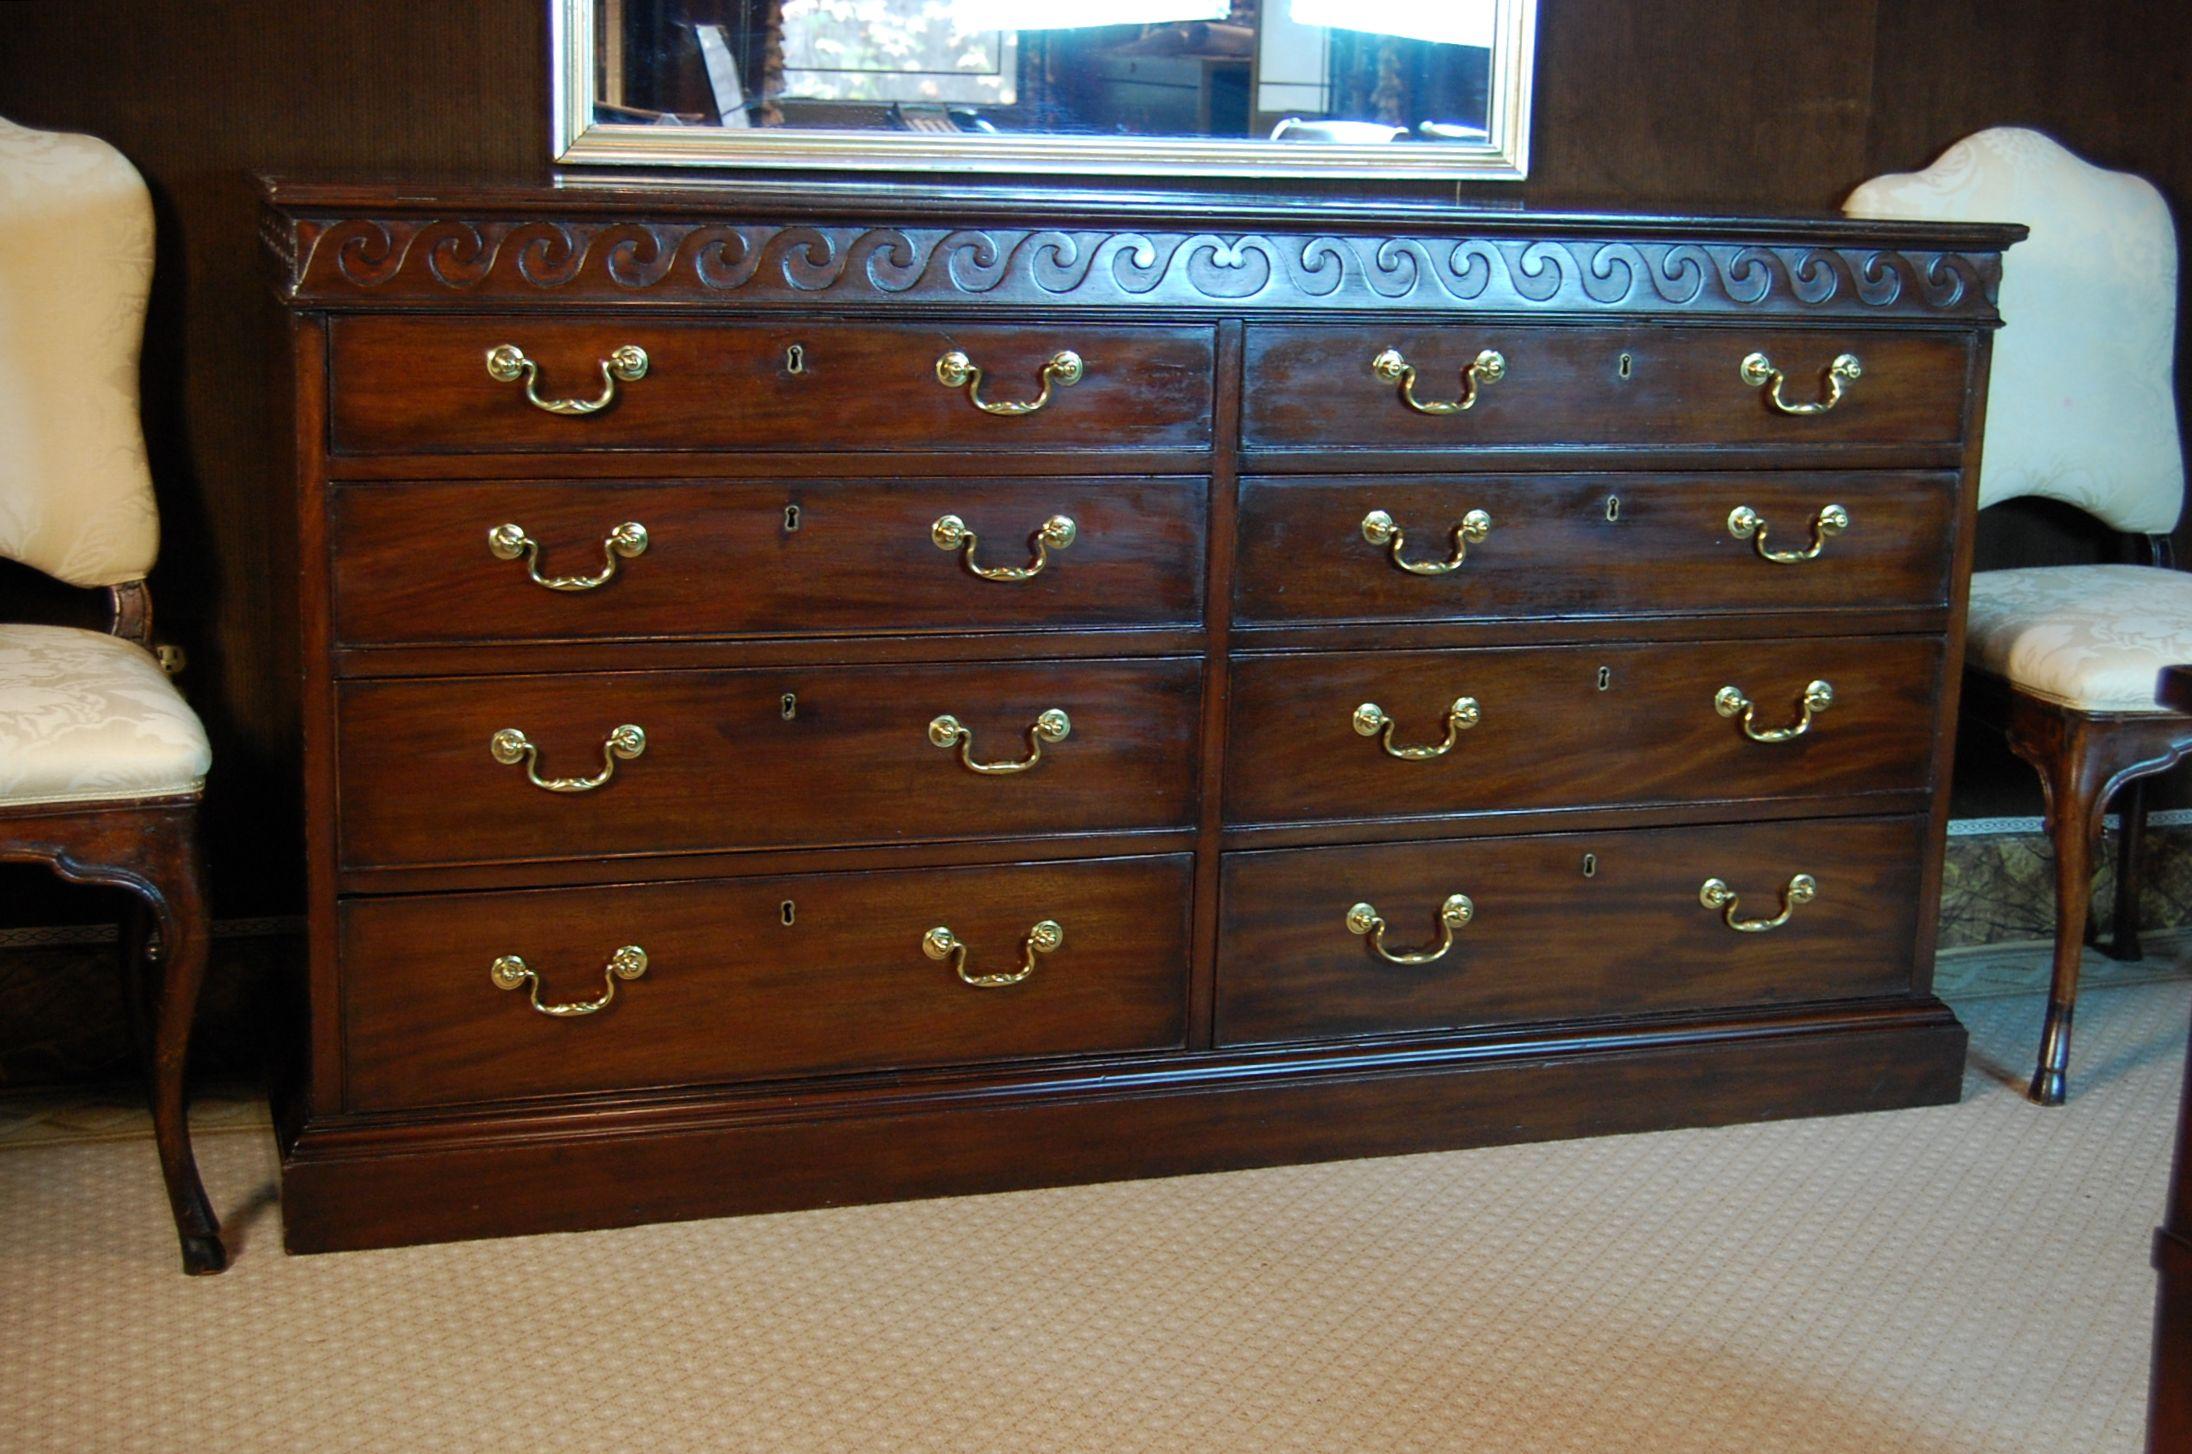 Handsome English Georgian mahogany sideboard with 8 drawers, each drawer is lined in either Pacific cloth, which prevents tarnishing of silver items, or in a blue cotton print. Three drawers have flatware dividers, late 18th-early 19th century.